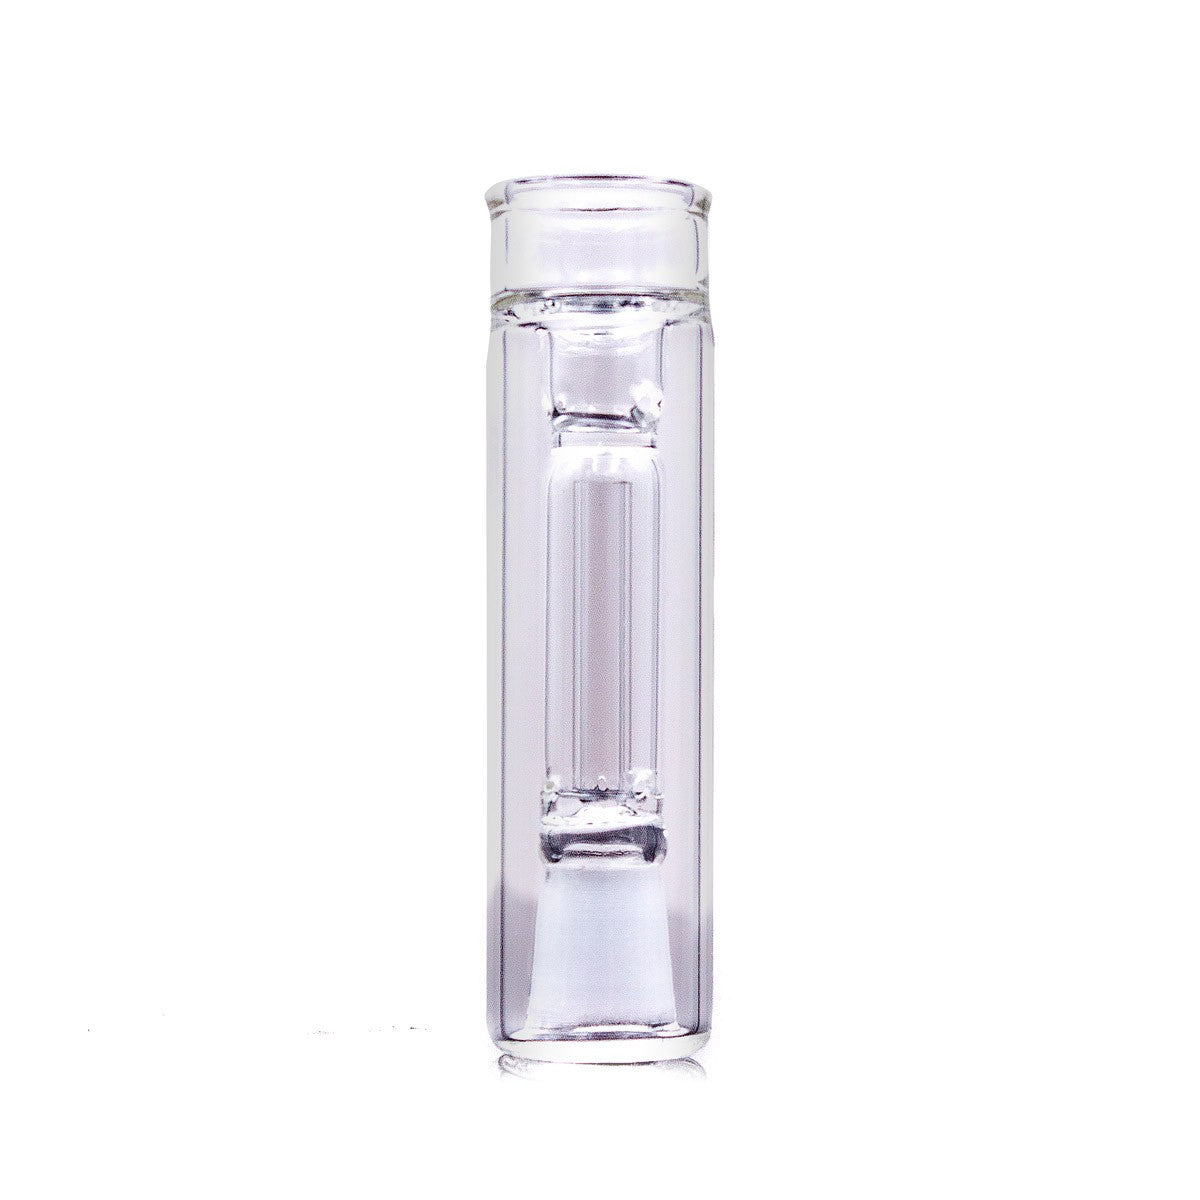 The Stash Shack Portable Glass Water Bubbler, front view on white background, compatible with DynaVap and Davinci IQ